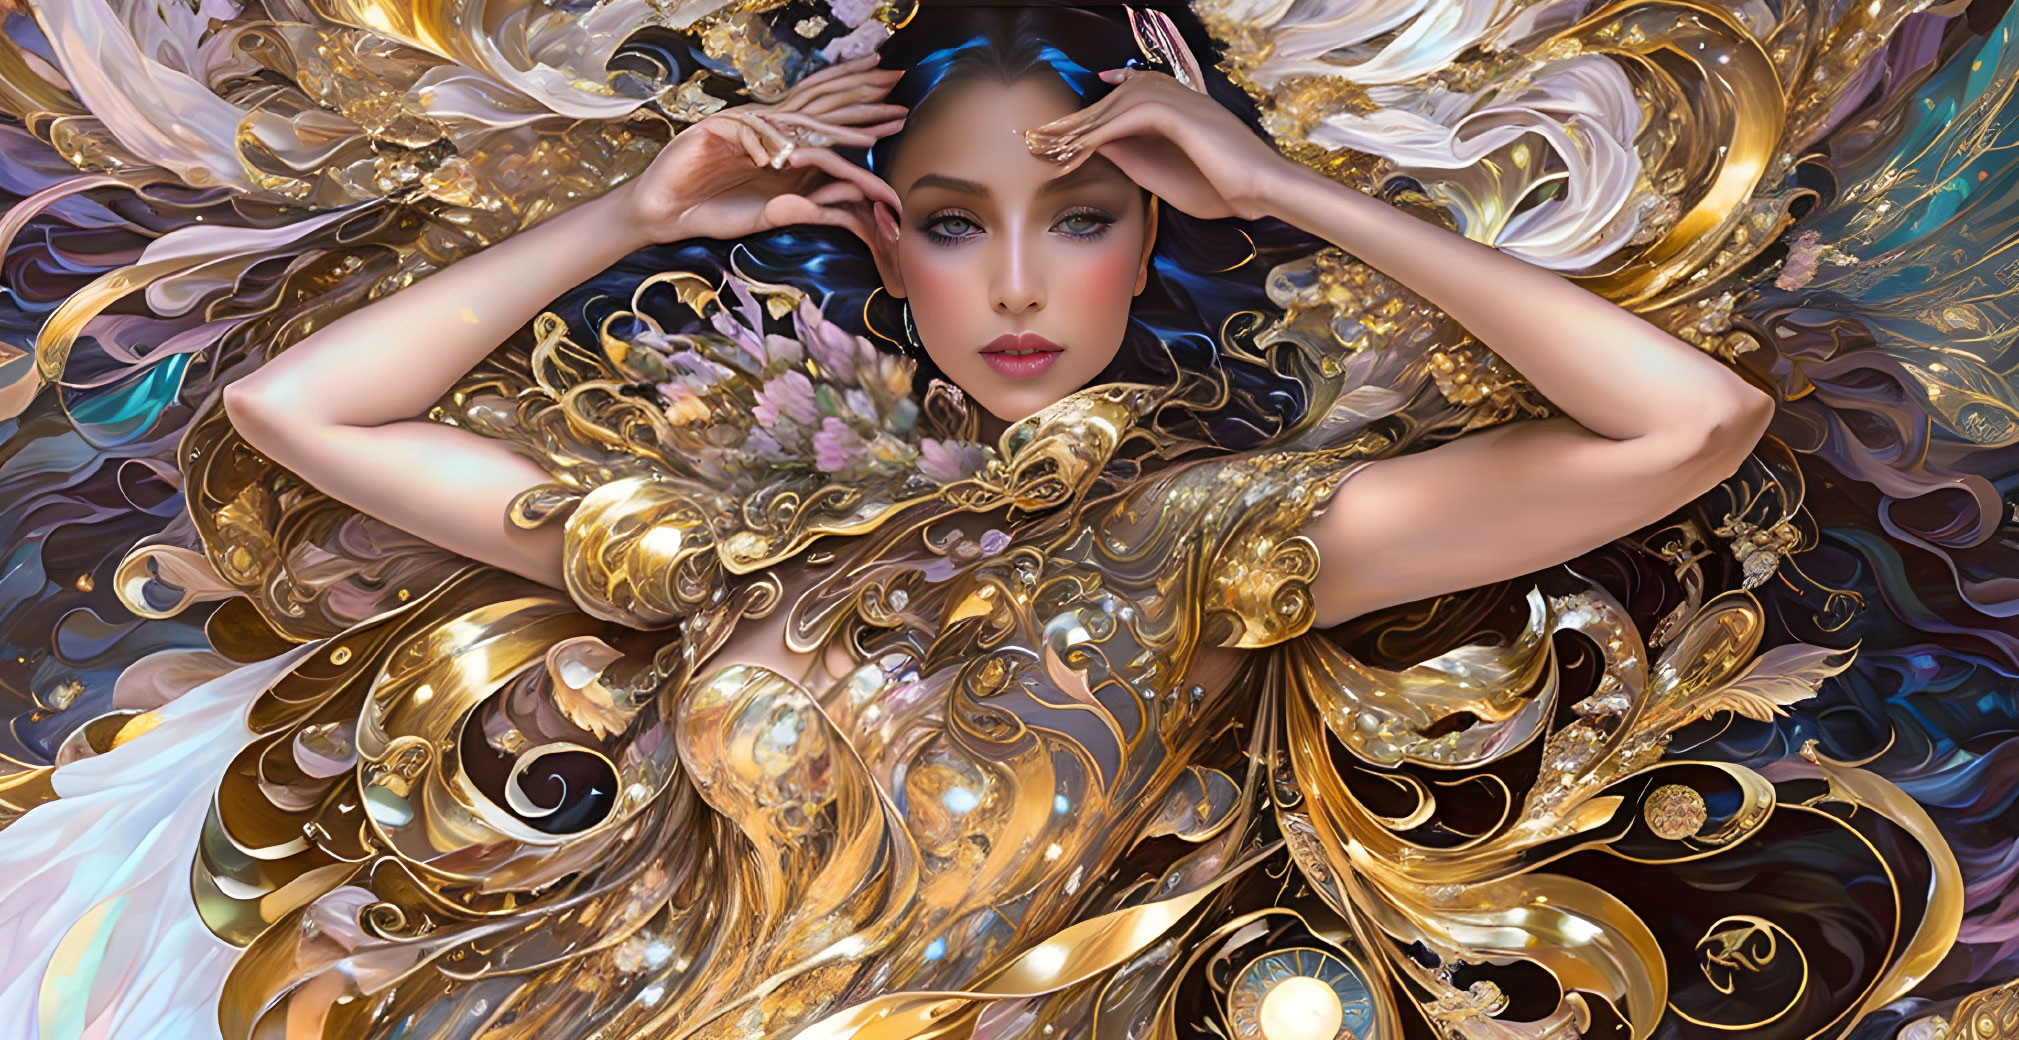 Woman in Digital Art with Golden Swirls and Floral Motifs